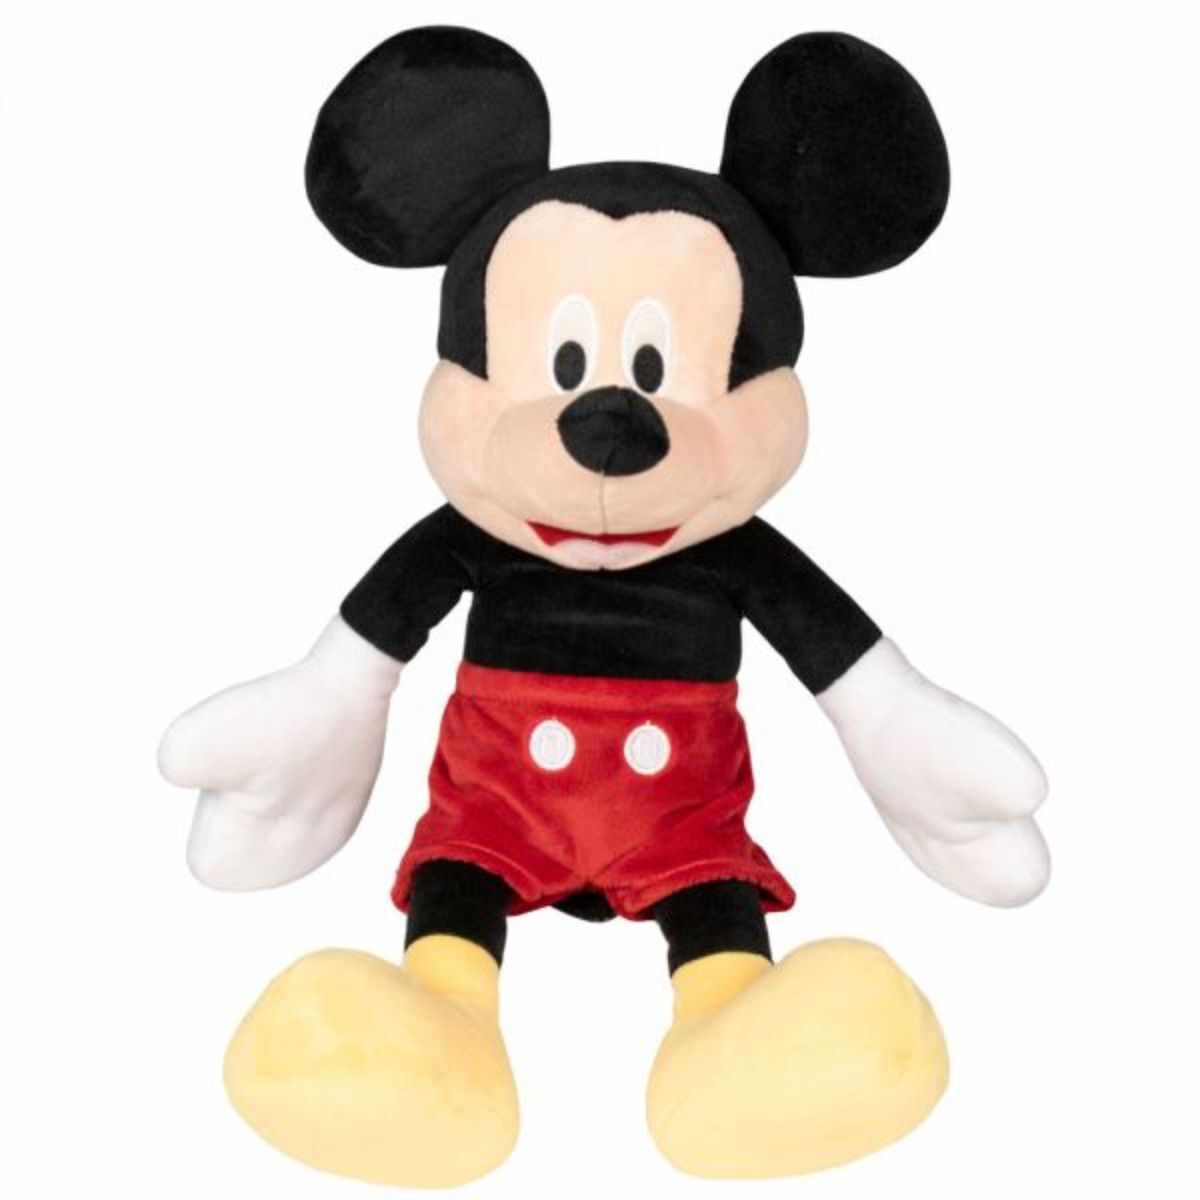 Jucarie de plus, Play By Play, Mickey Mouse, 36 cm